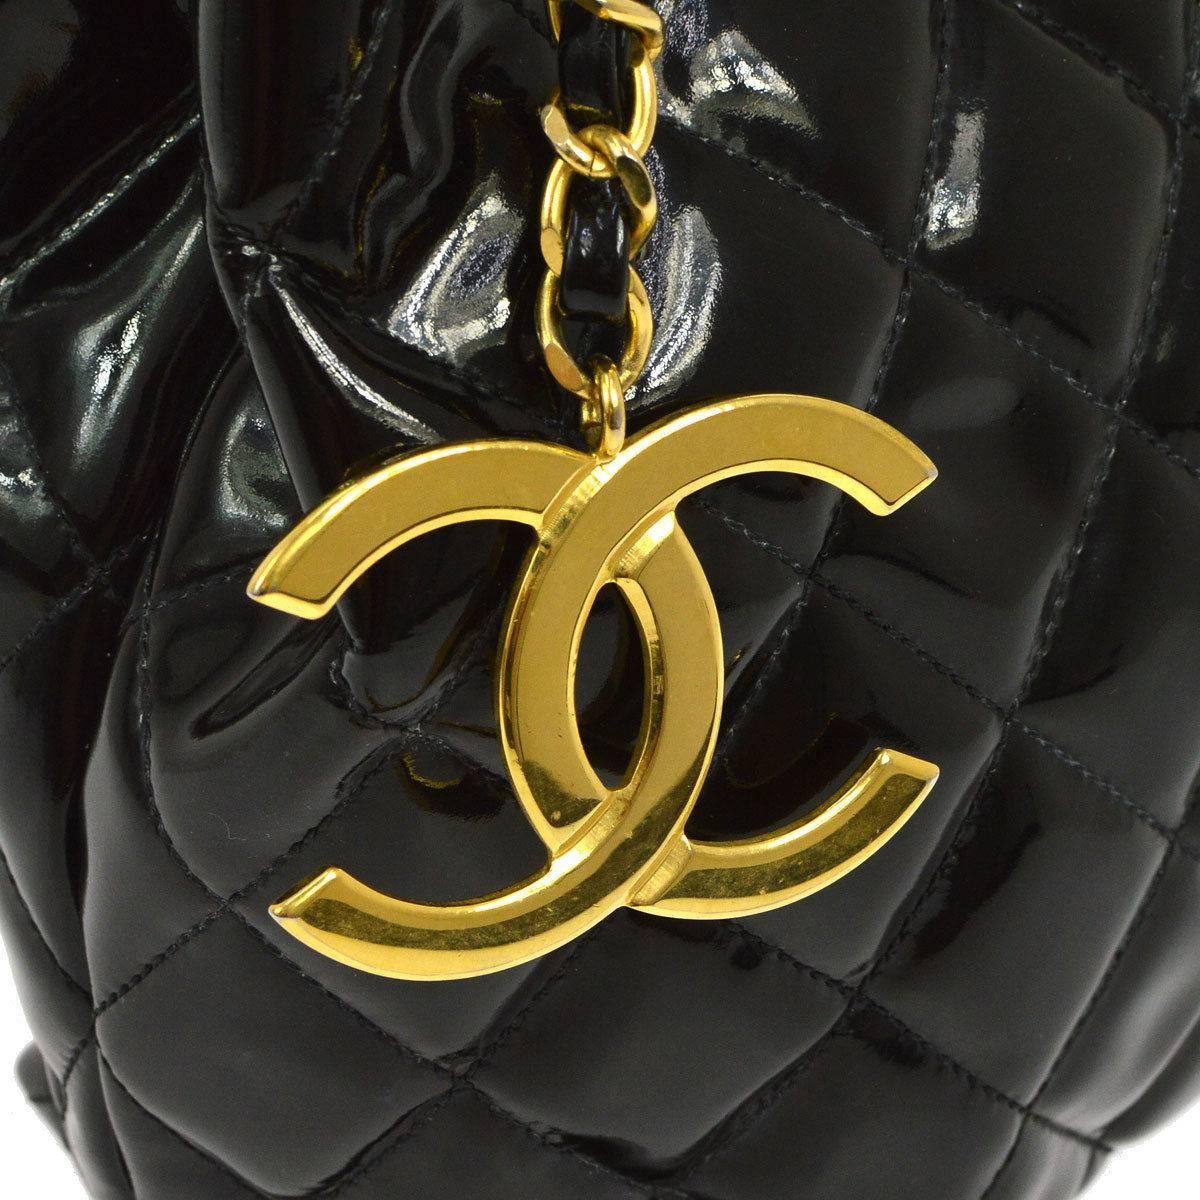 CURATOR'S NOTES

Chanel Black Quilted Patent Leather Gold Charm Carryall Evening Shoulder Bag  

Patent leather
Gold tone hardware
Zipper closure
Made in Italy
Date code 1344987
Shoulder strap drop 16"
Measures 11.5" W x 8" H x